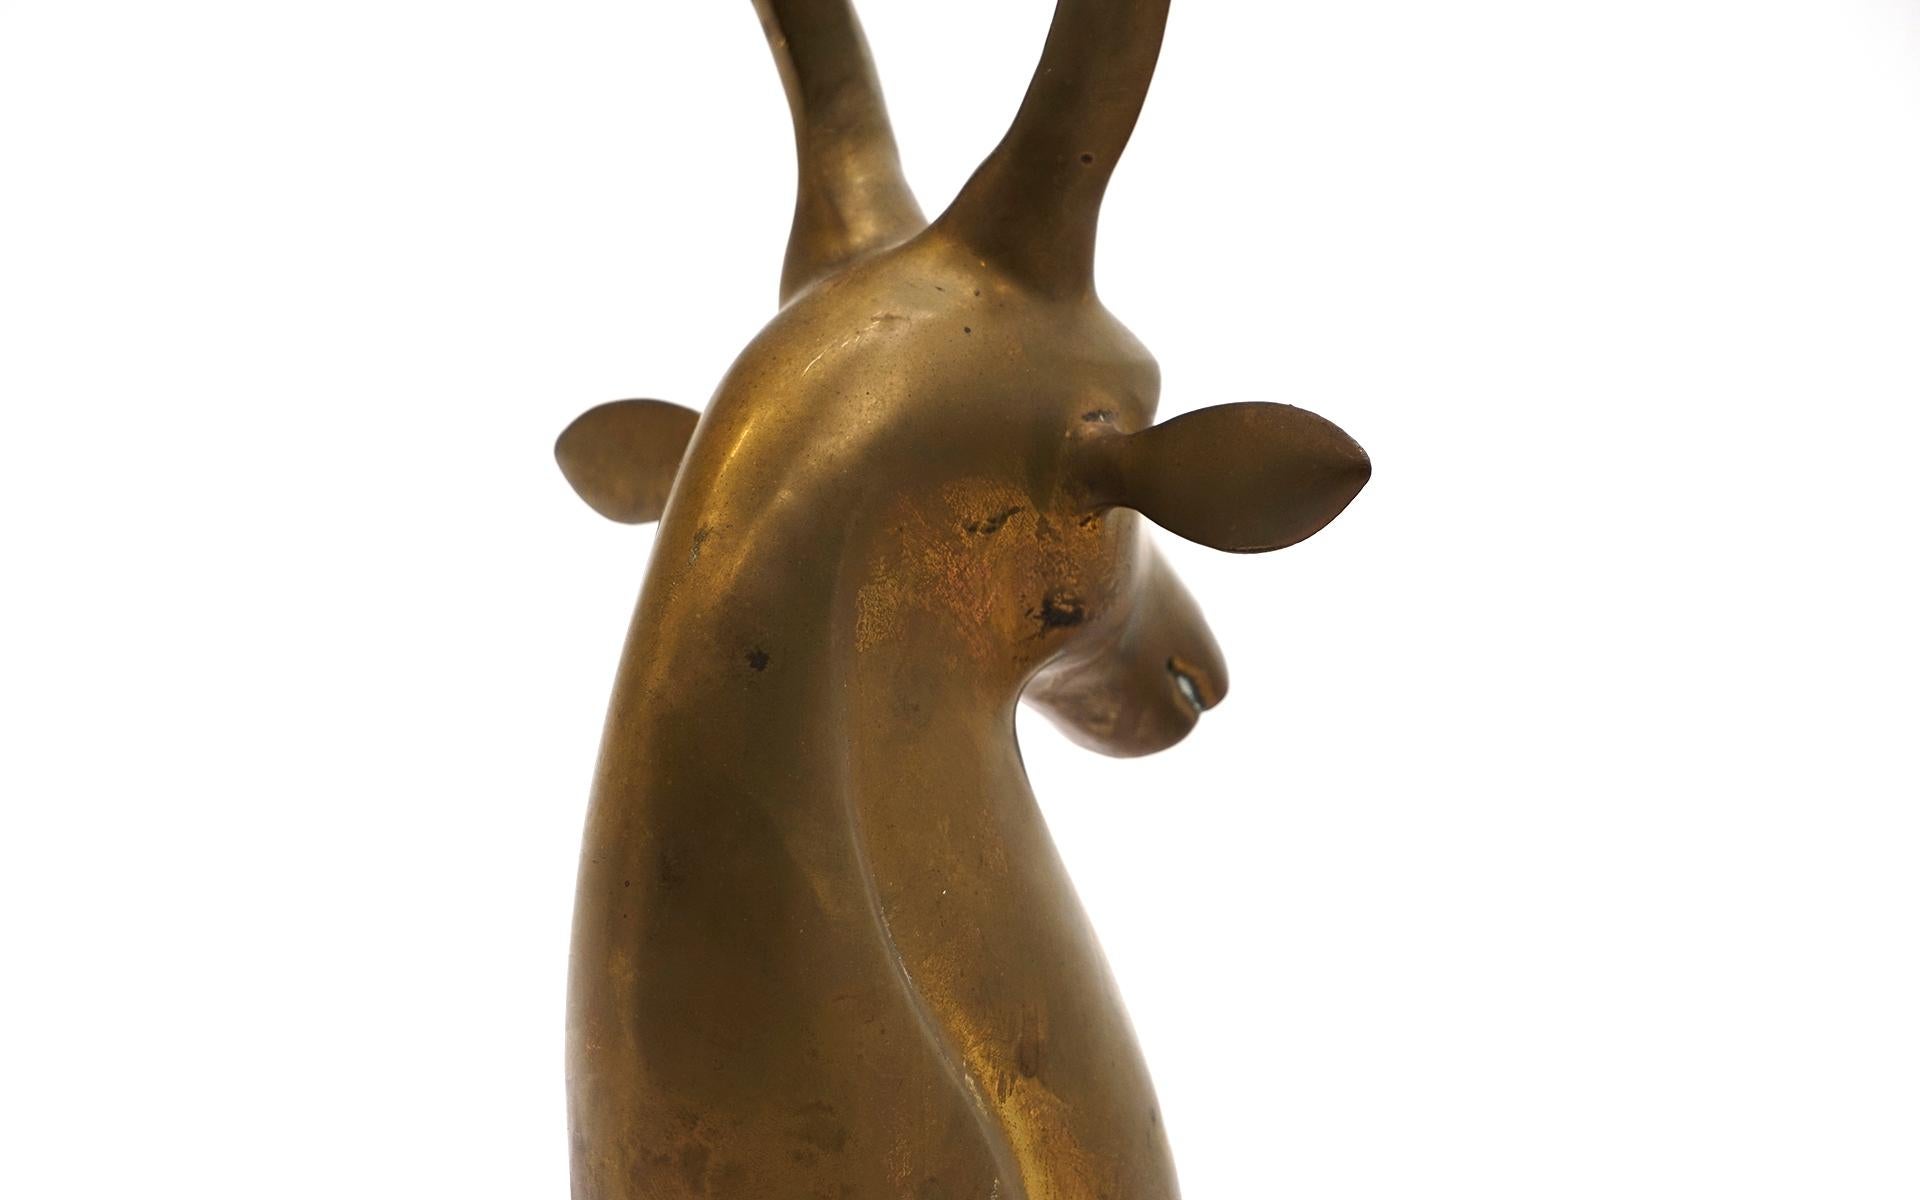 Mid-Century Modern Brass Deer with Horns / Antlers Table Top Sculpture, Stylized, Natural Patina